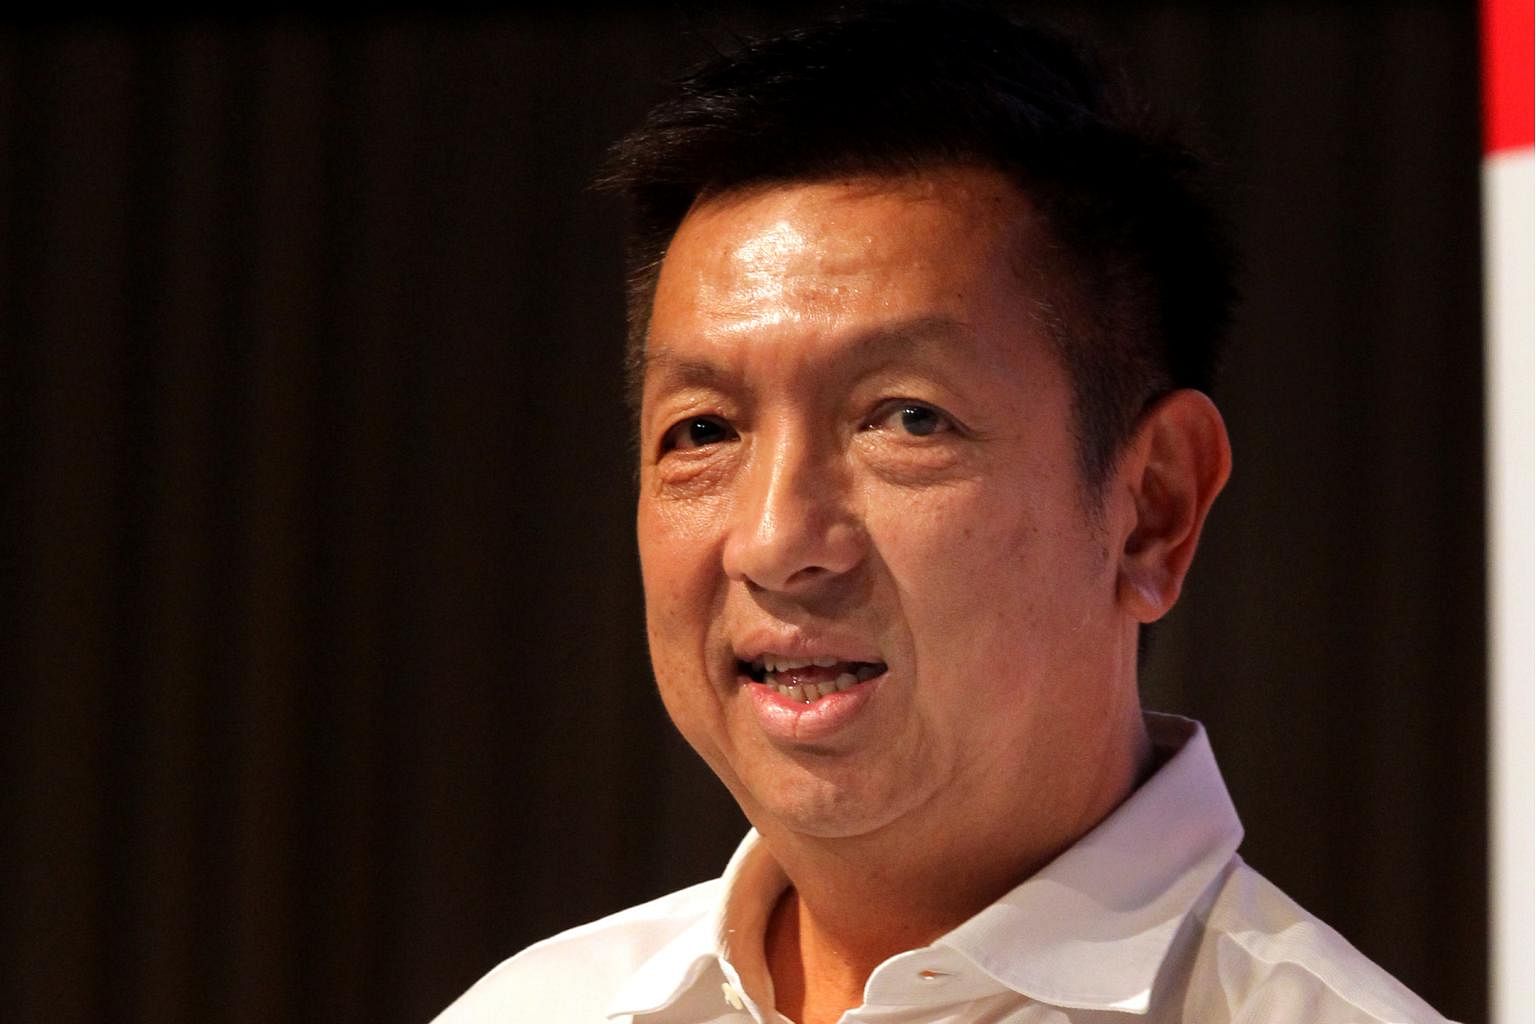 Billionaire Peter Lim pays for $1 million worth of meals for front-line  healthcare workers, Singapore News & Top Stories - The Straits Times